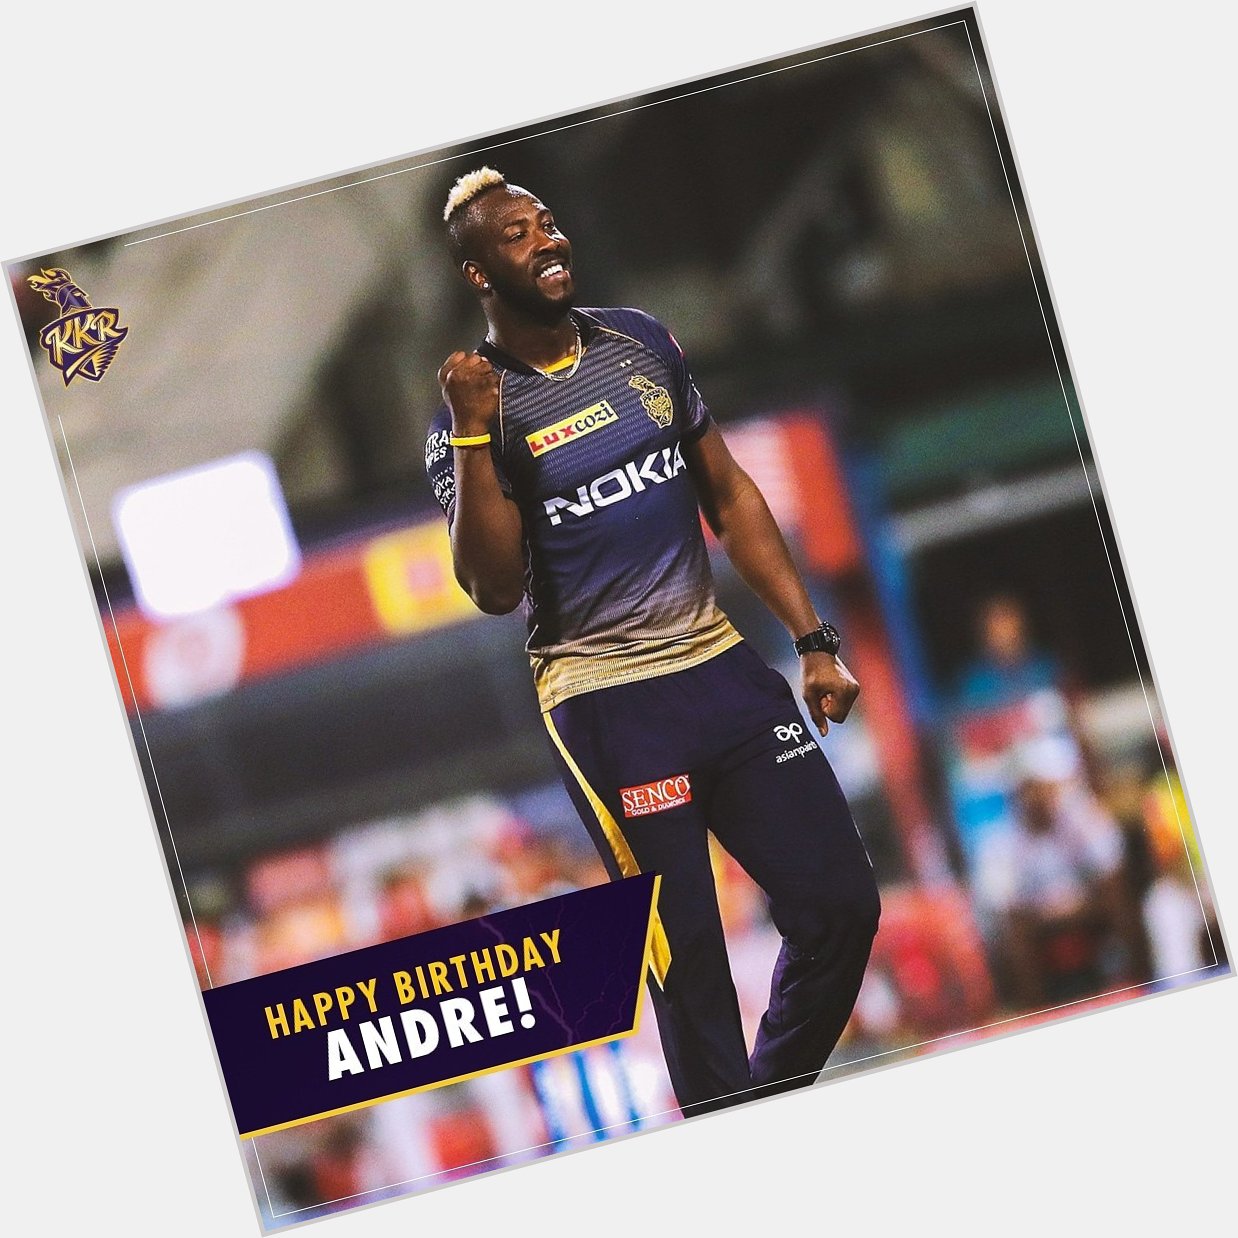 Andre Russell Happy birthday.... stay blessed entertain us more and more 